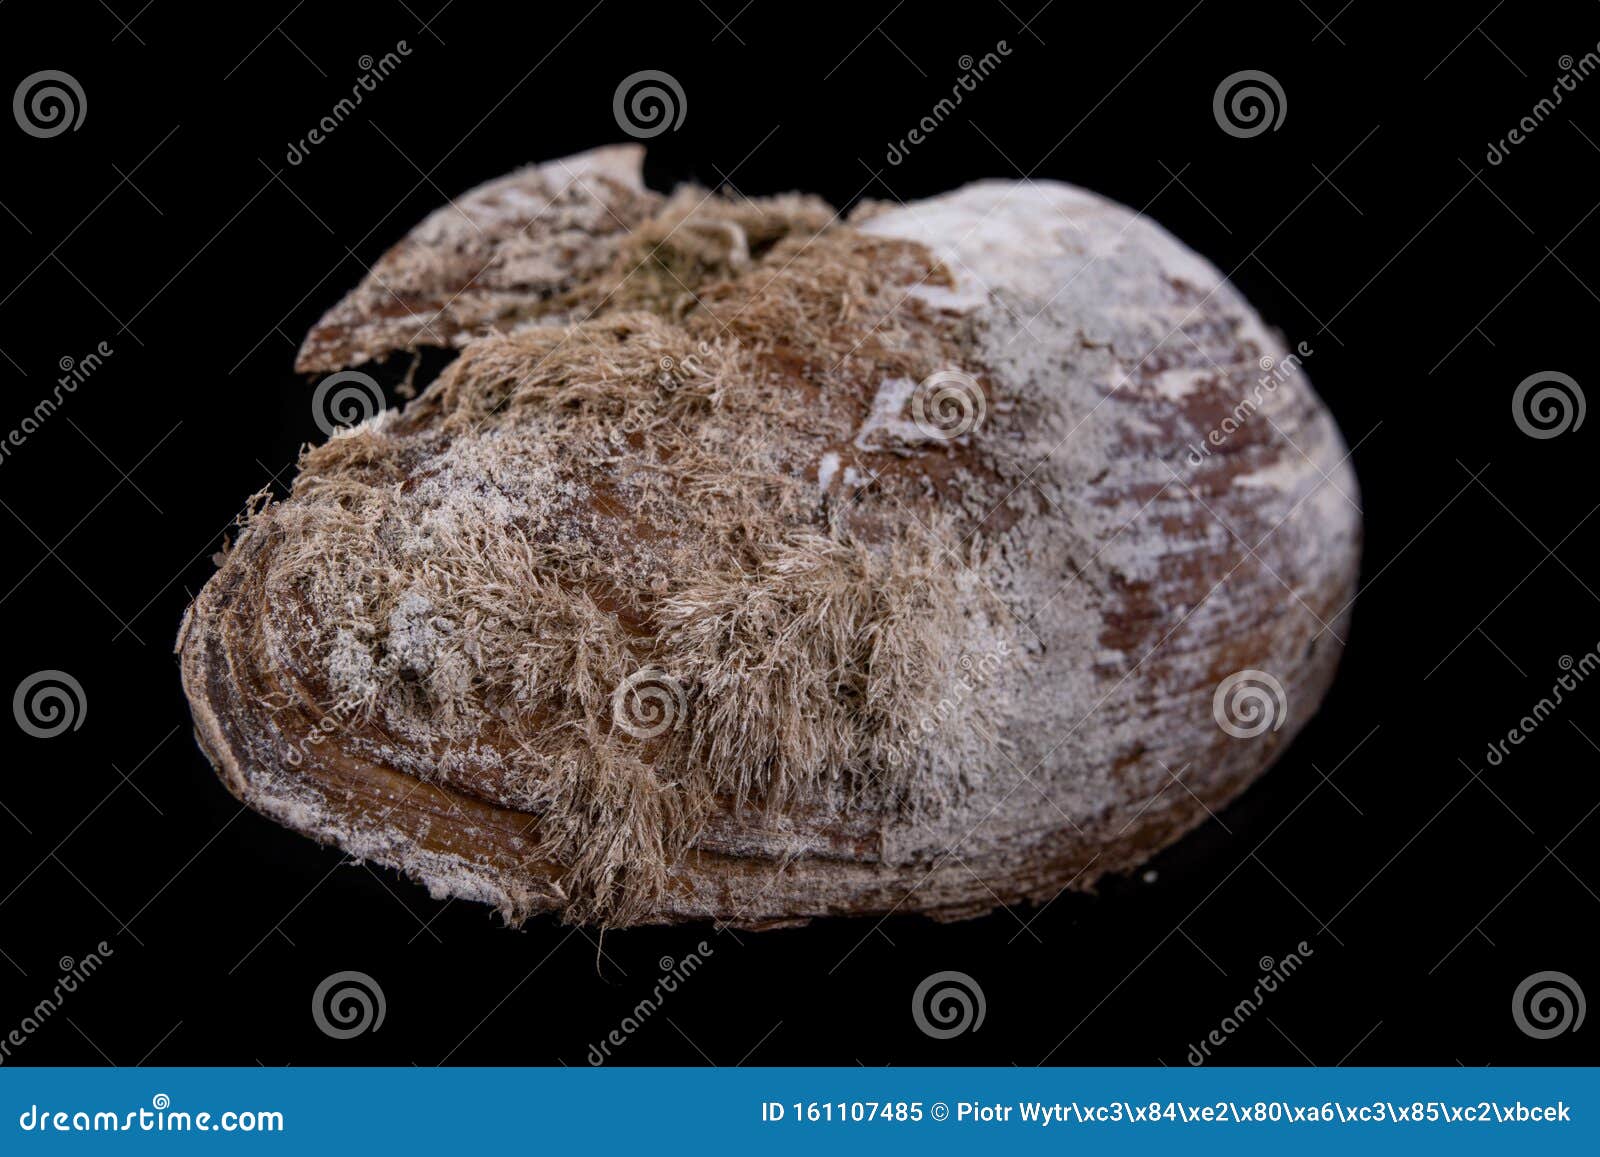 anodonta anatina empty shell. a clam shell living in the lakes of central europe